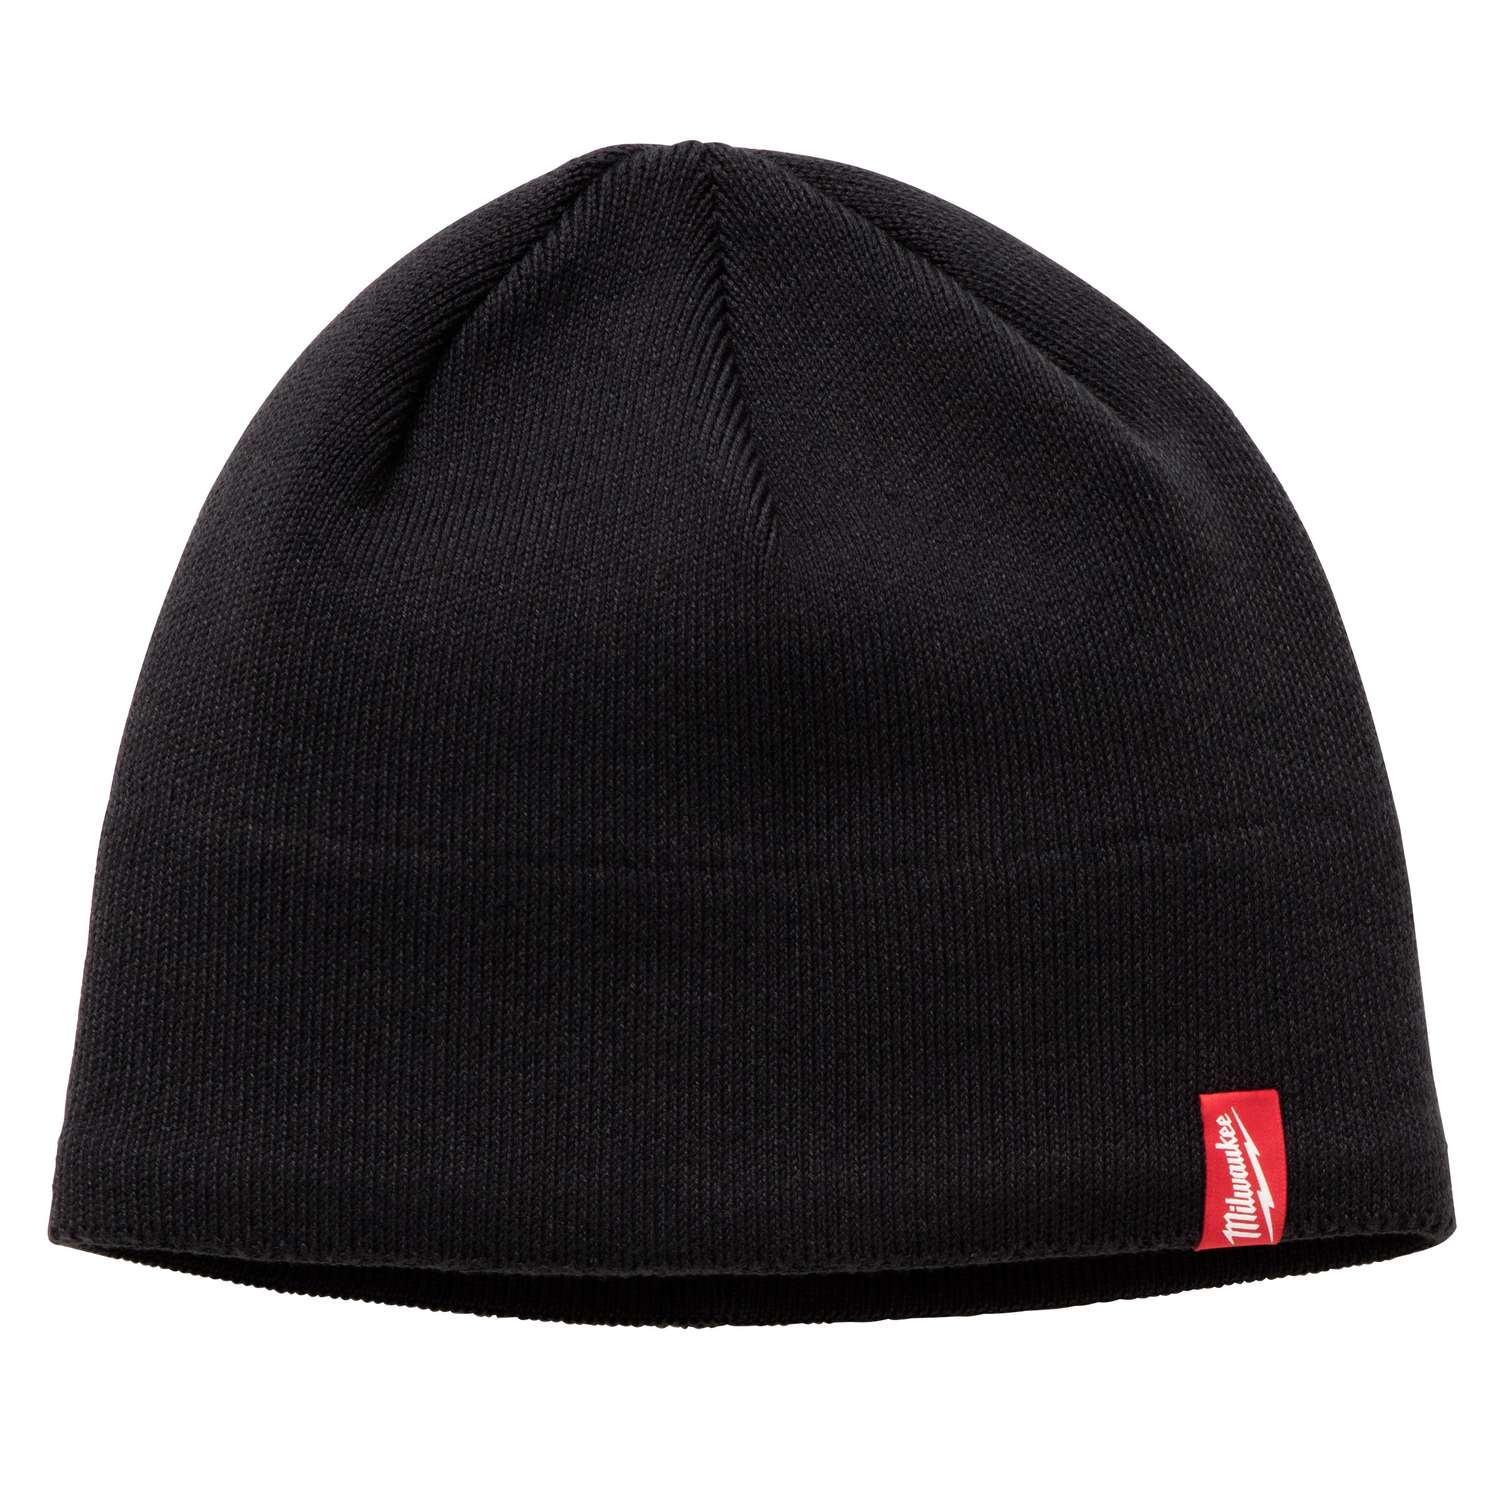 Milwaukee Fleece Lined Beanie Black One Size Fits Most - Ace Hardware